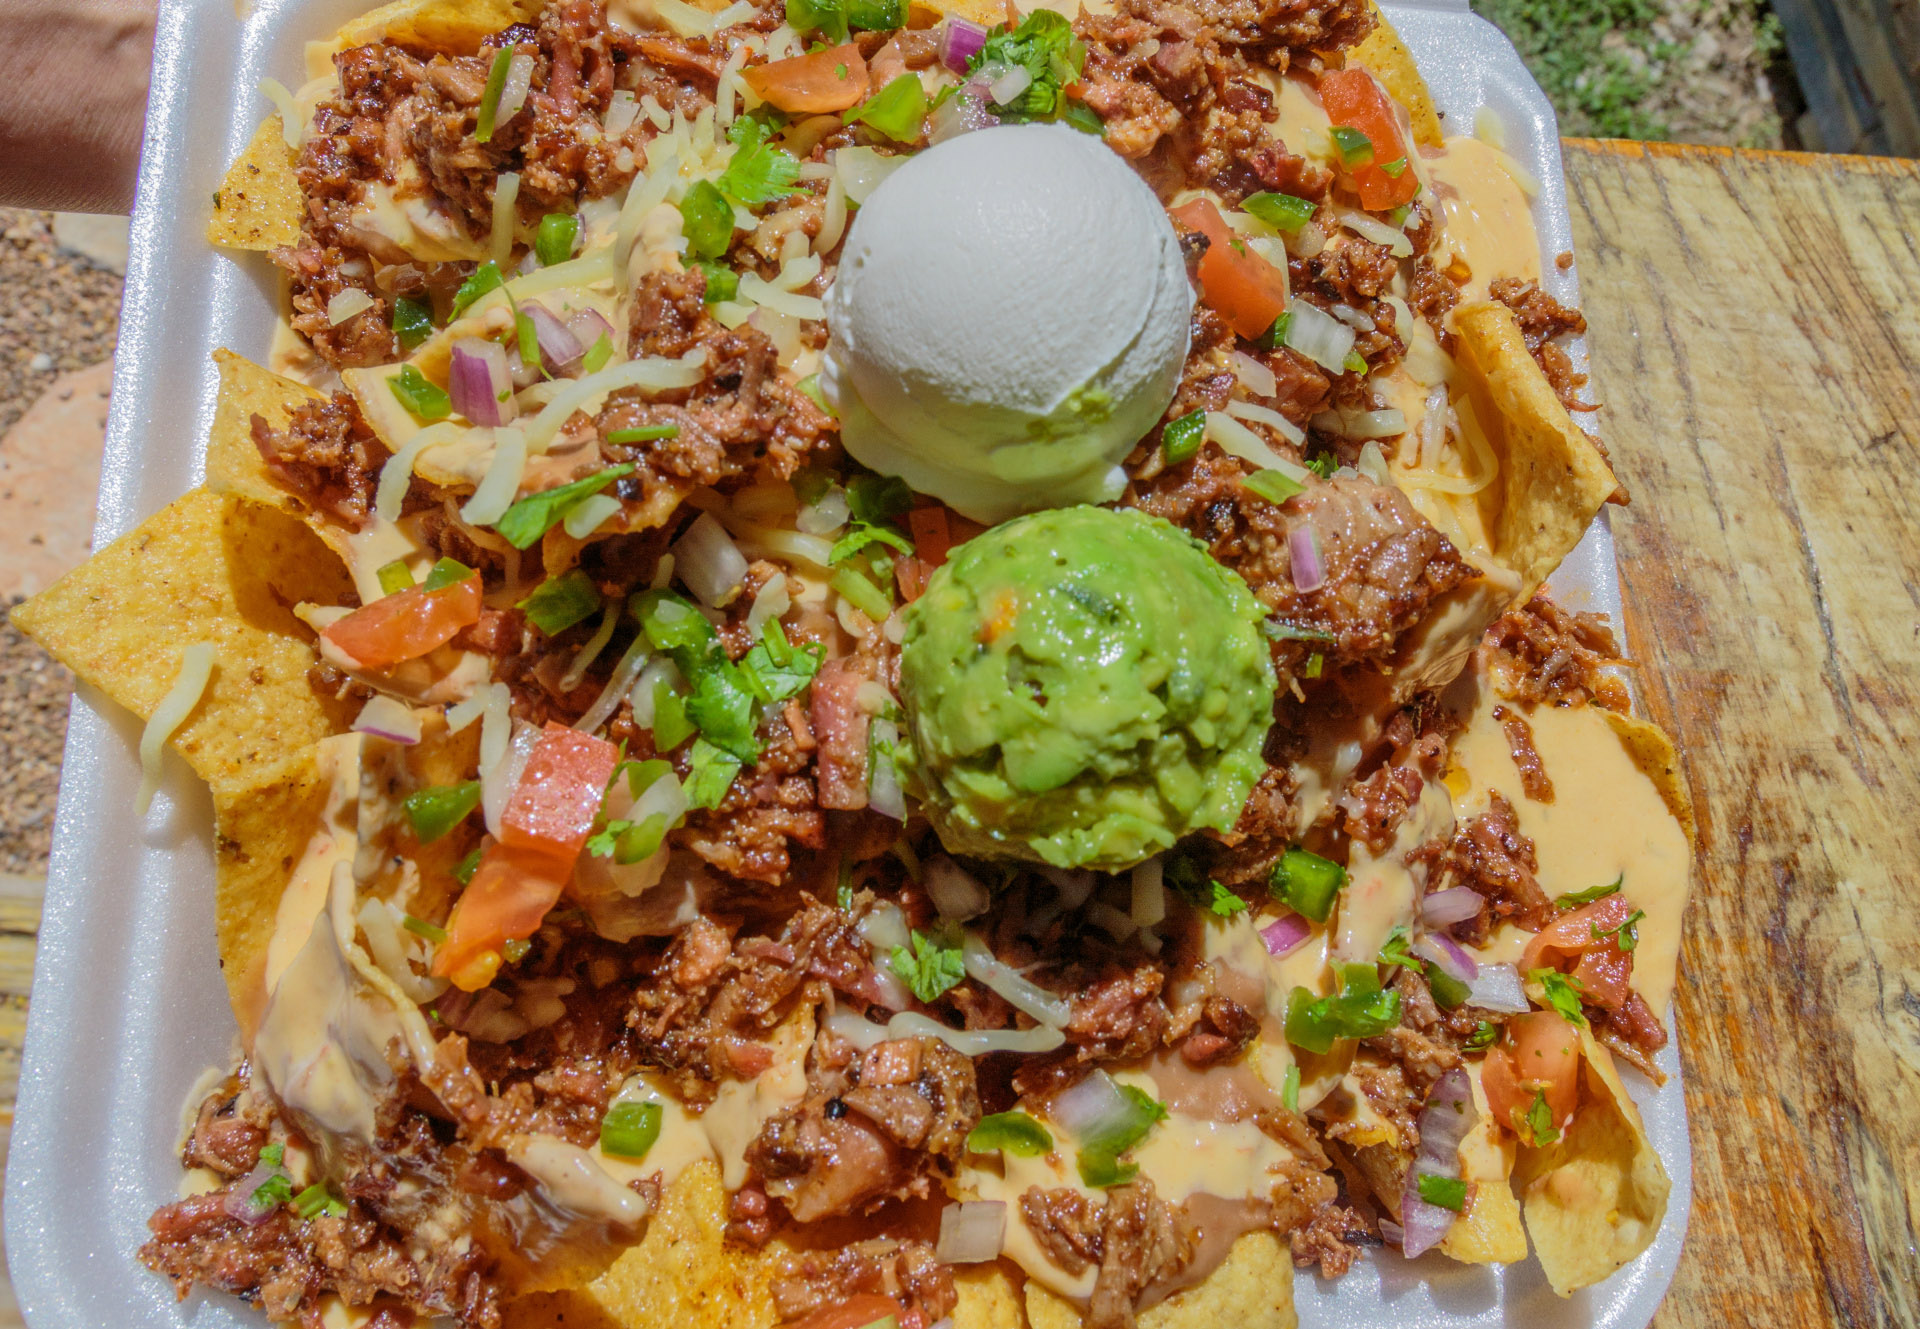 Nachos with scoops of guacamole and sour cream. Photo by Will van Overbeek.